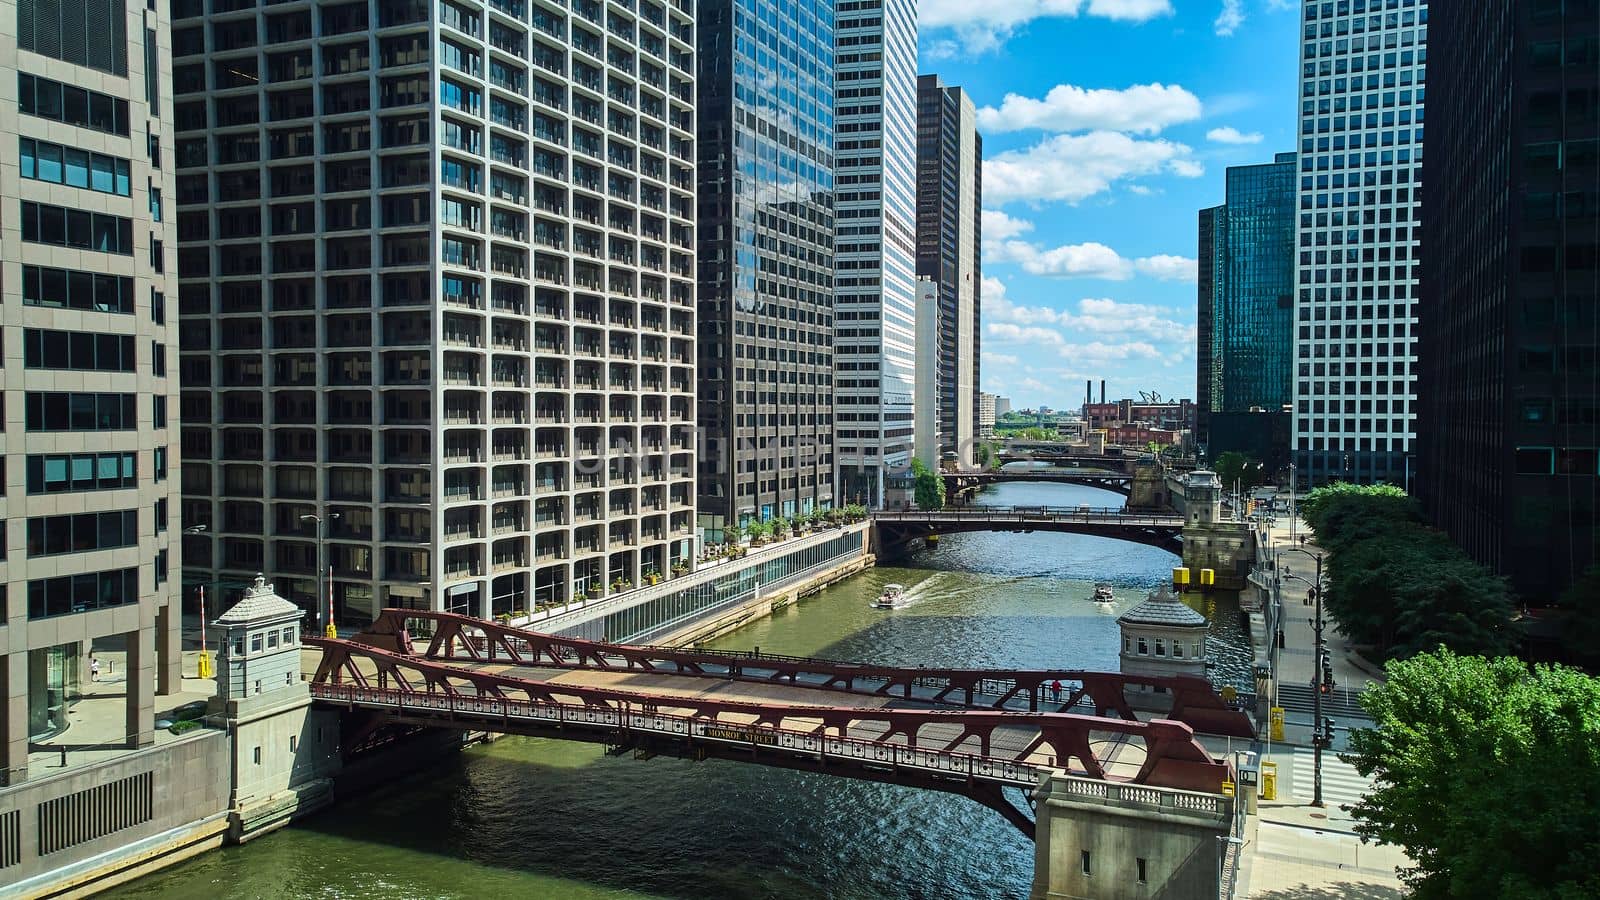 Image of View down row of bridges through the Chicago ship canal surrounded by skyscrapers